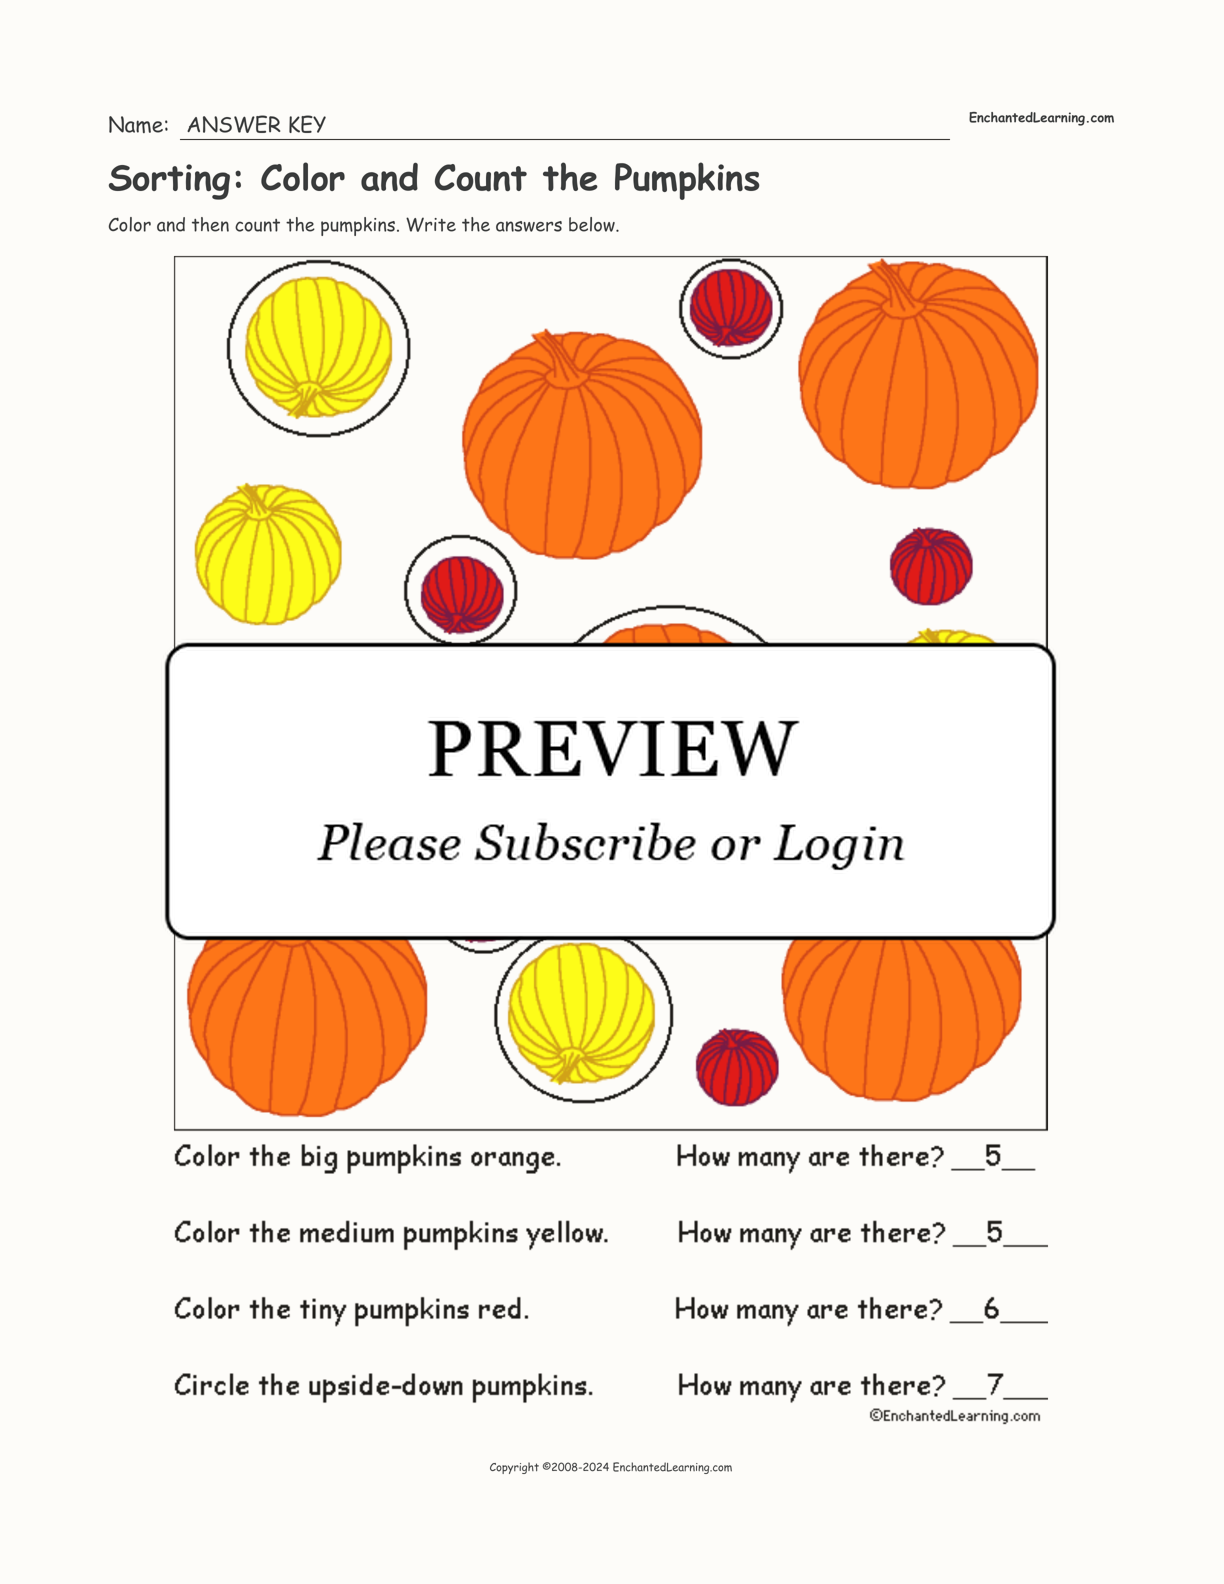 Sorting: Color and Count the Pumpkins interactive worksheet page 2